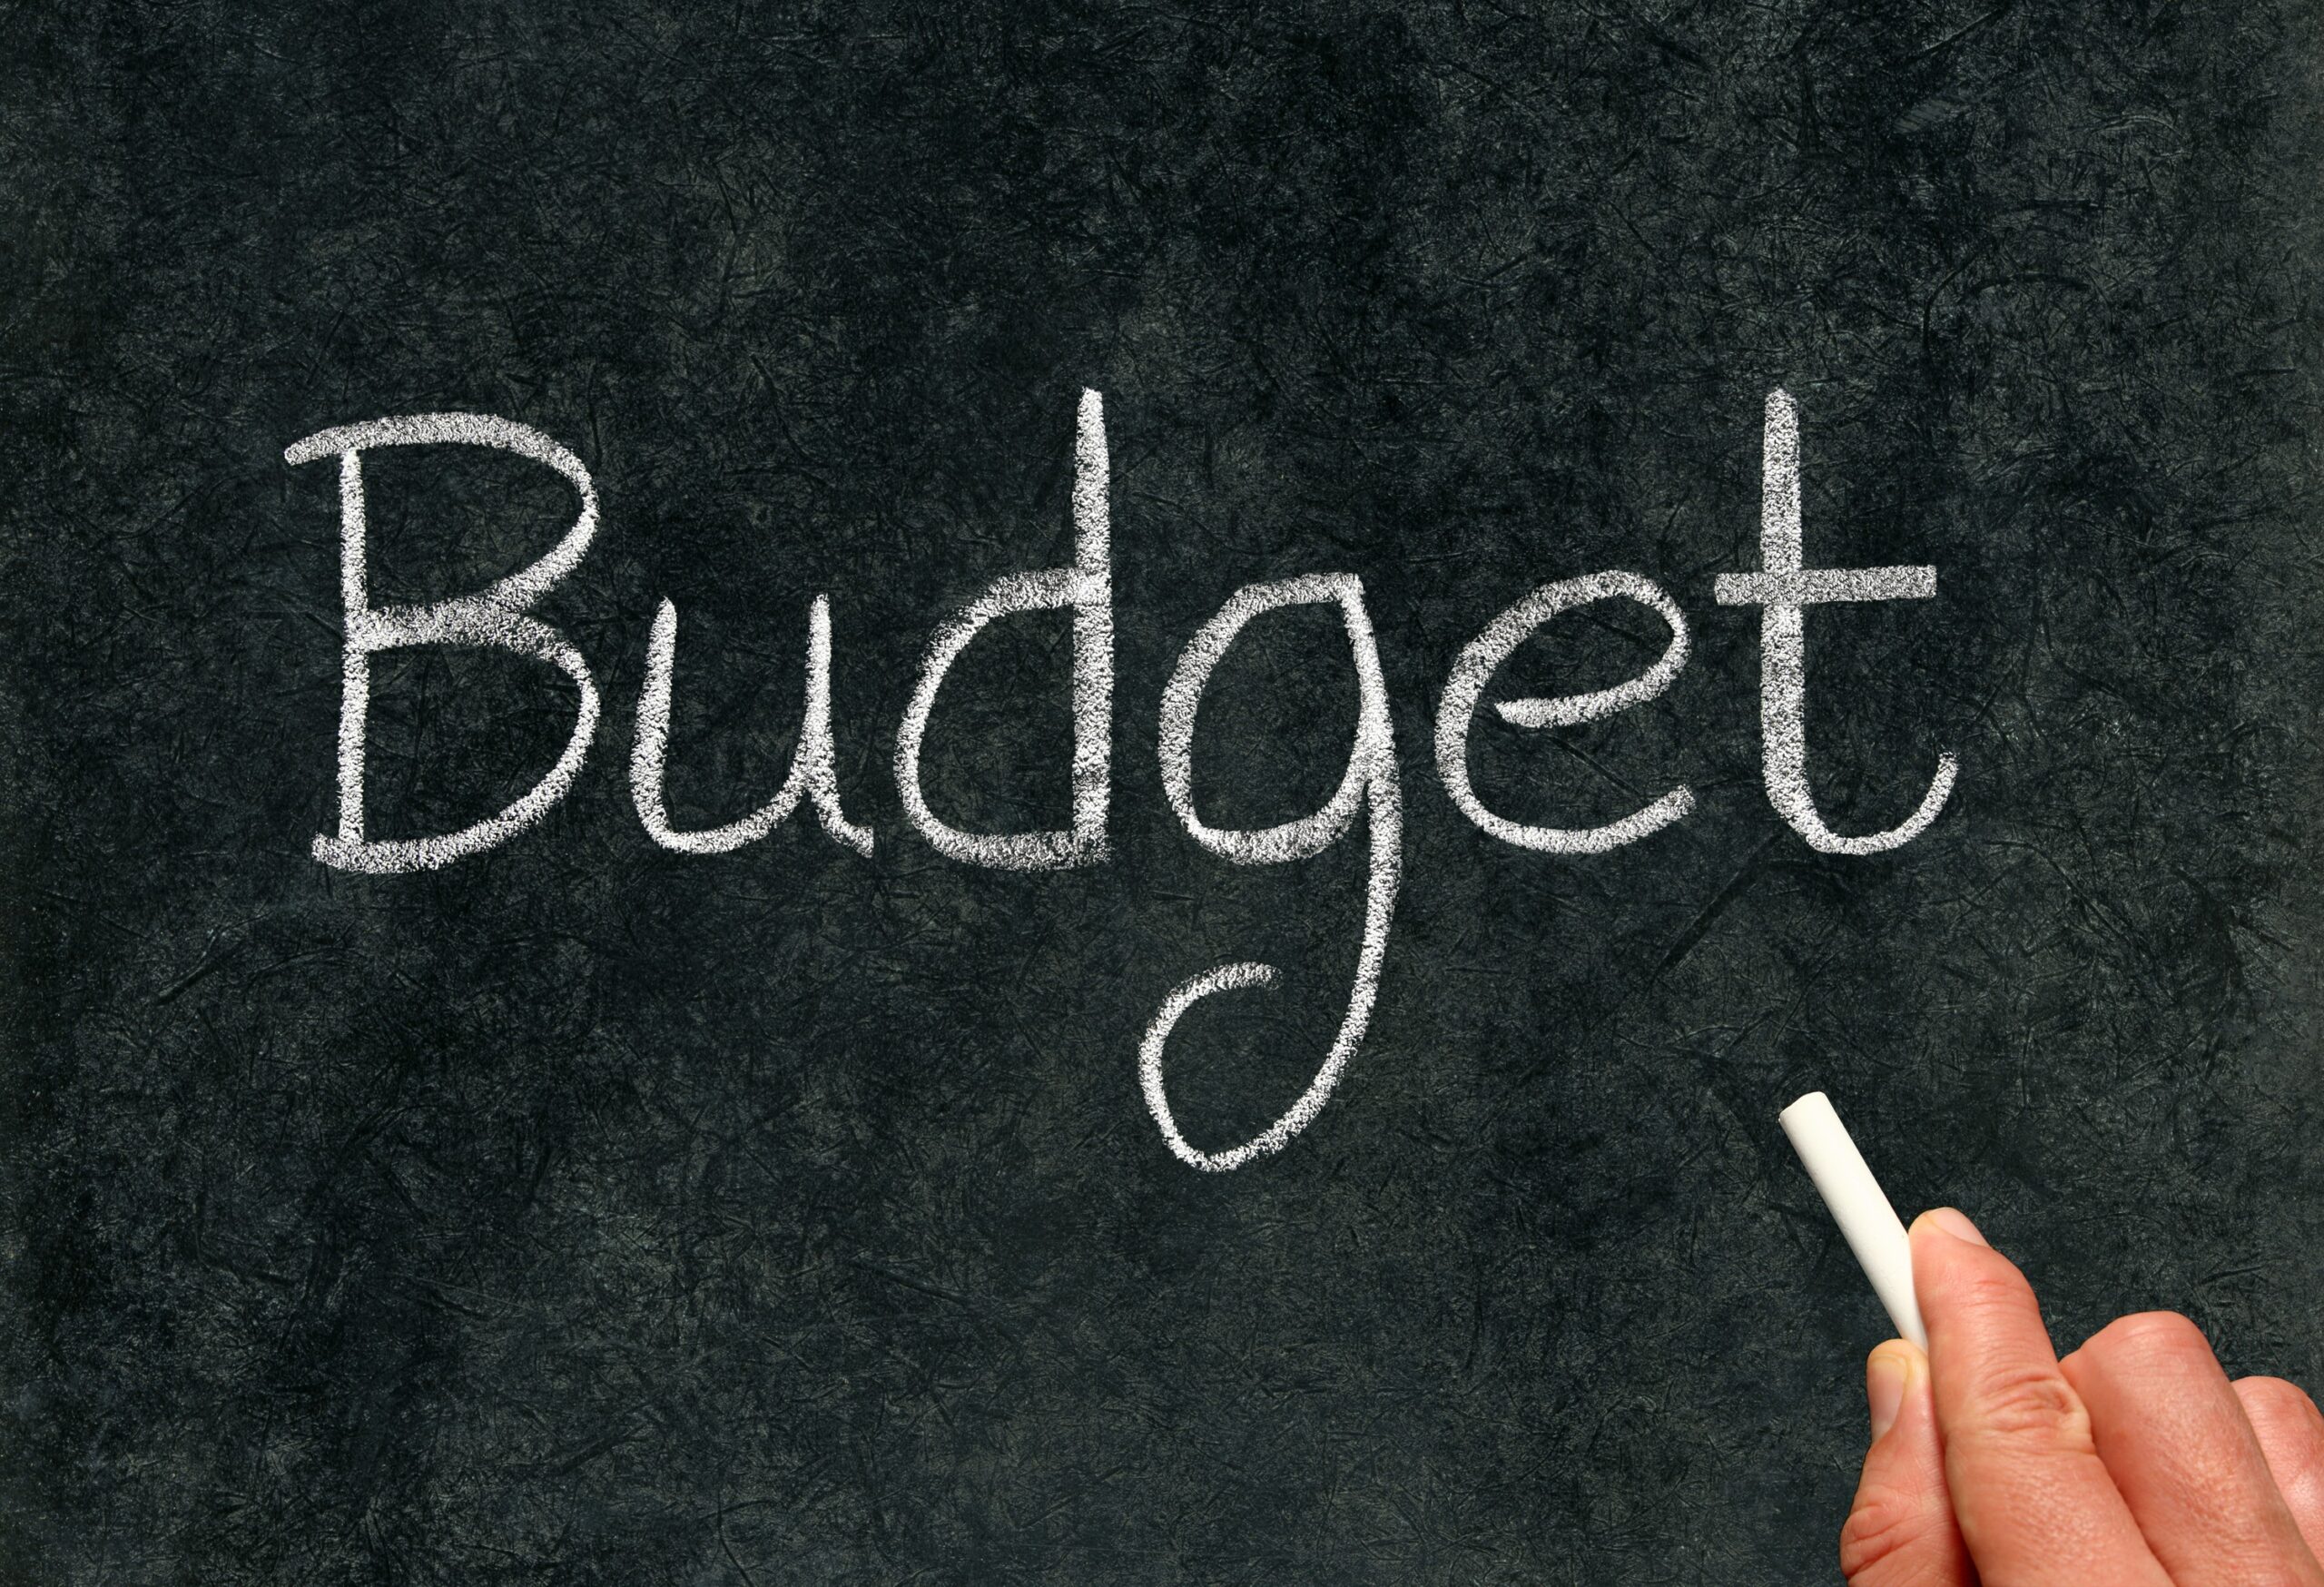 Budget, written with white chalk on a blackboard. Video Captioning Budget